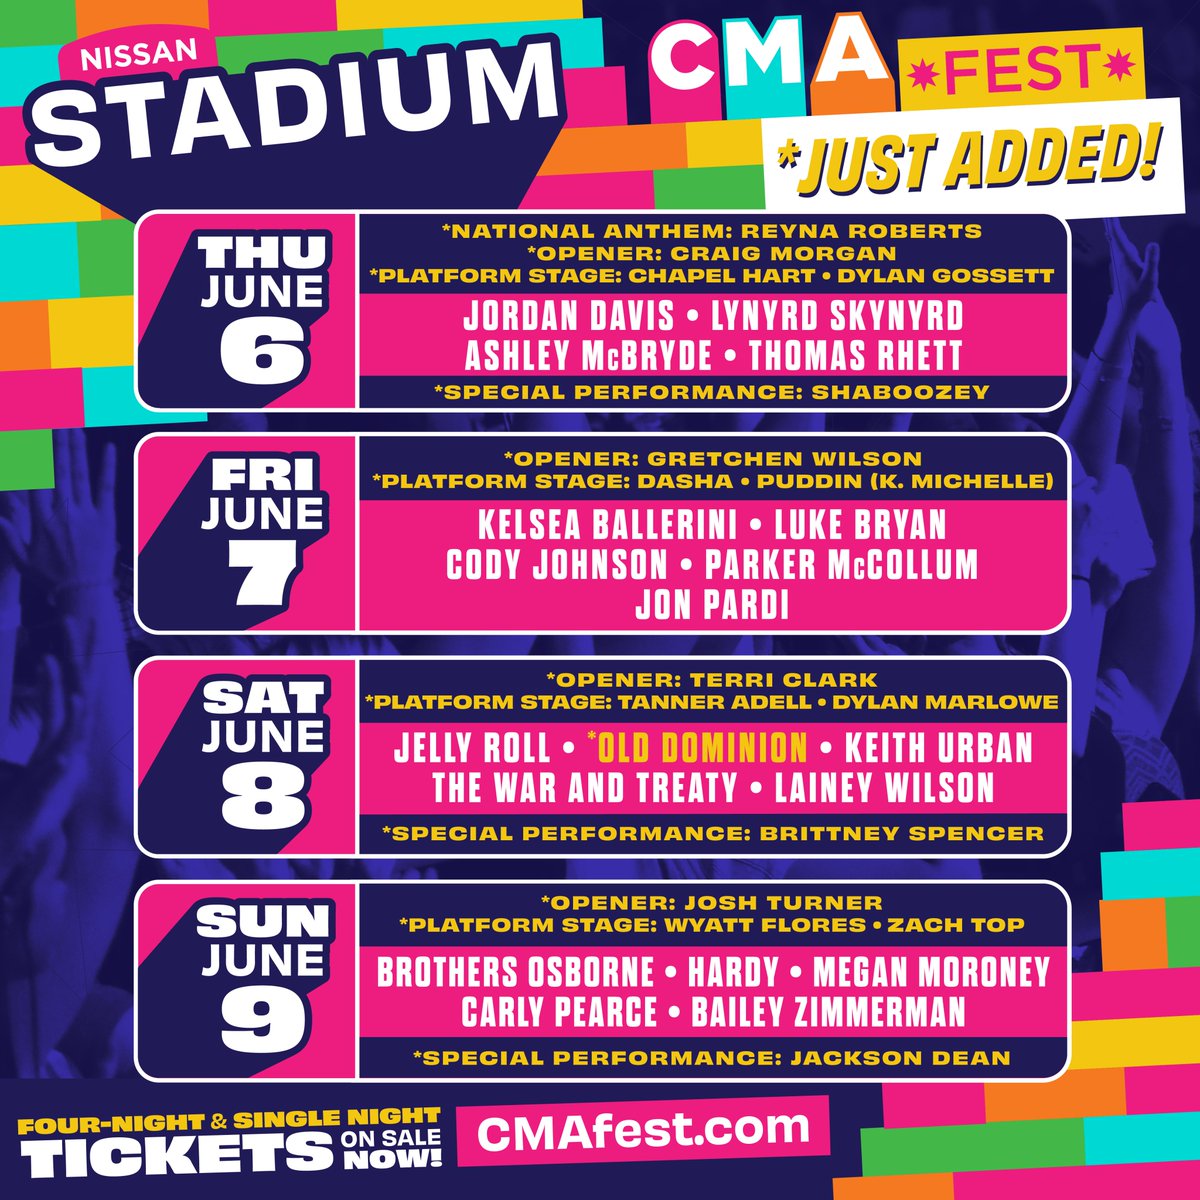 Oh, you thought we were done? 😏 JUST ADDED! #CMAfest just keeps getting better and better! With NEW additions you definitely won't want to miss, go check out the lineups now by downloading the CMA Connect app! 🎫: CMAfest.com/tickets